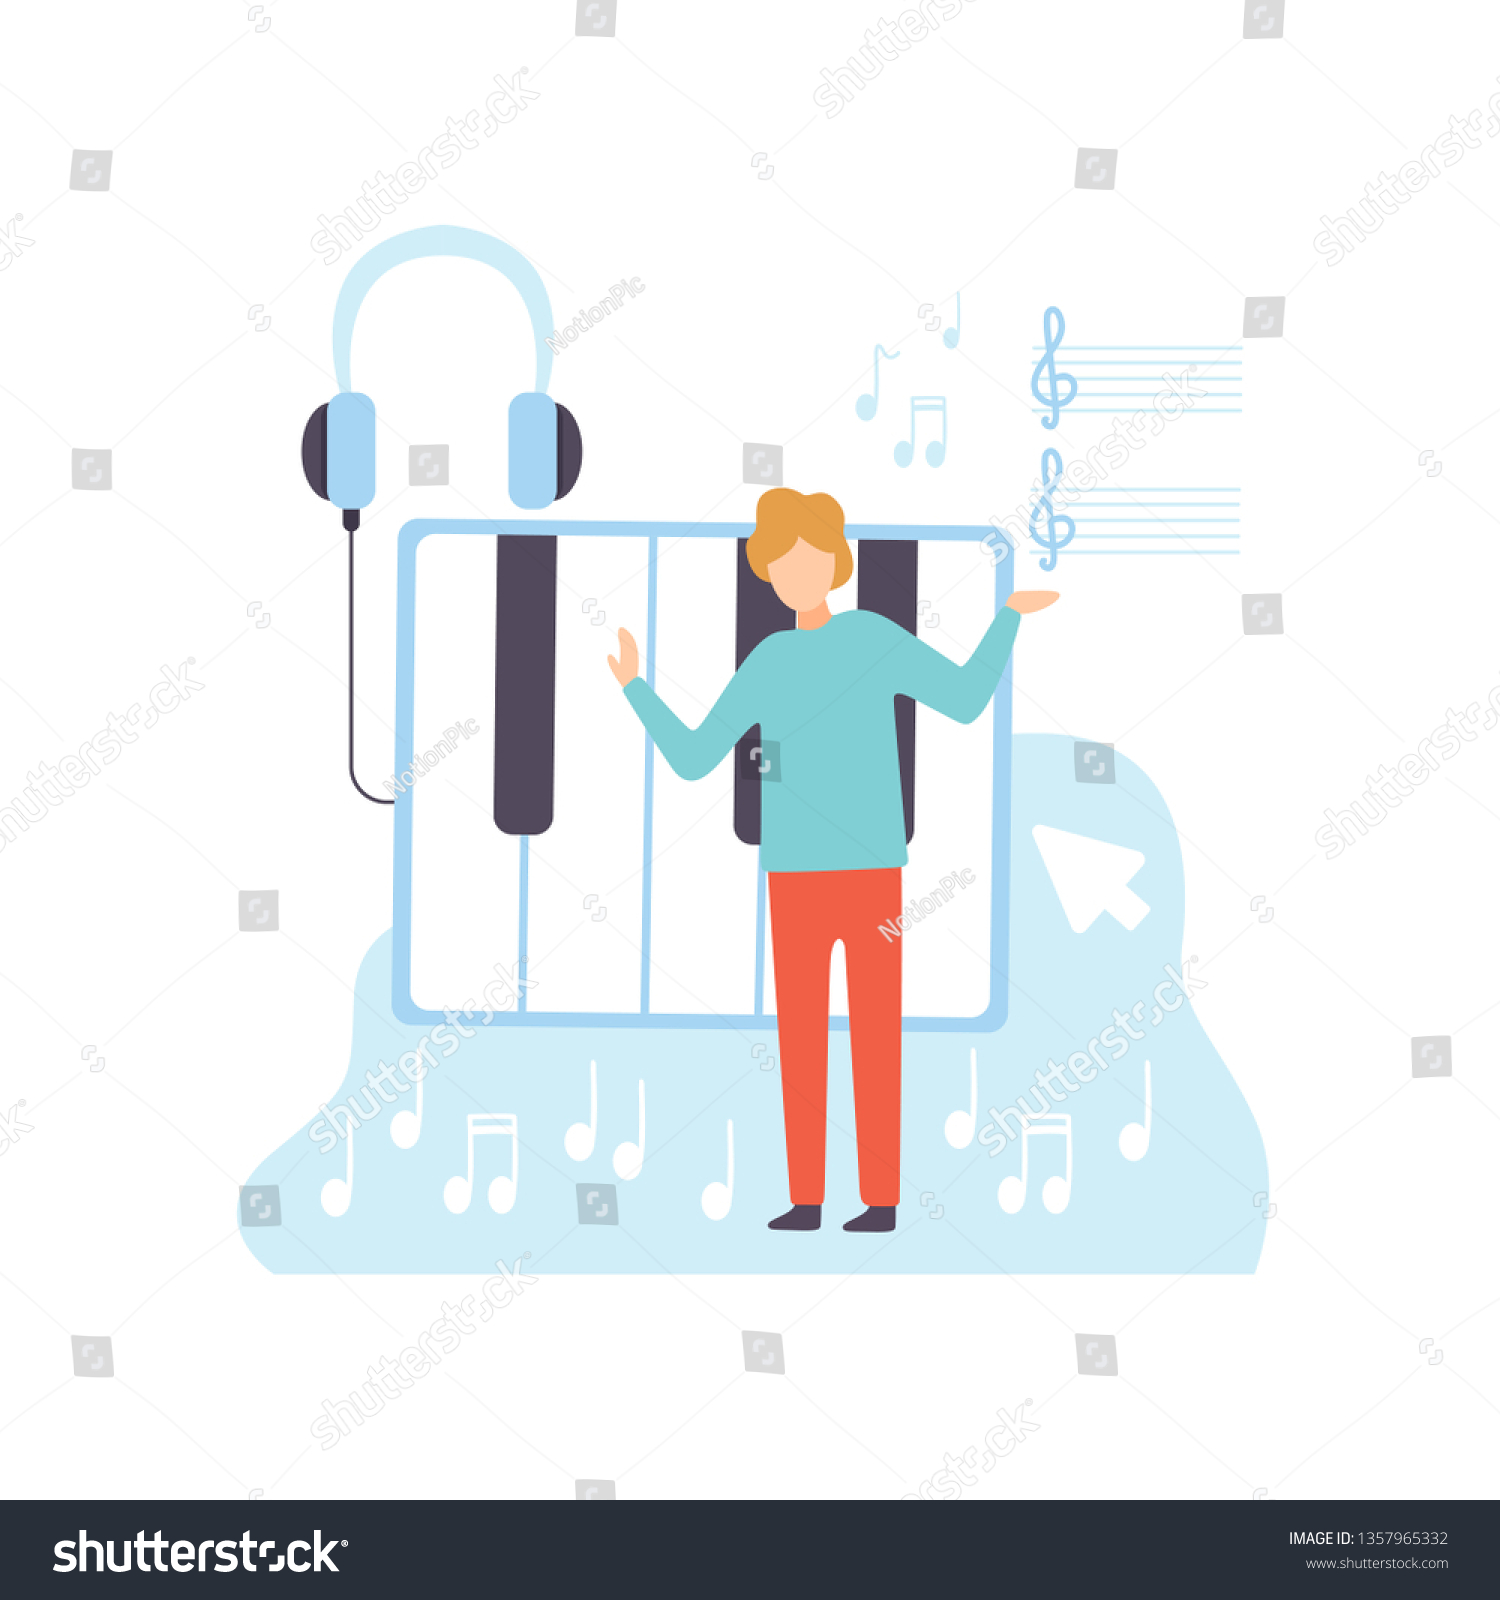 SVG of Male Musician Creating Music Content. Technology Process of Software Development, Social Media Marketing. Vector Illustration. svg